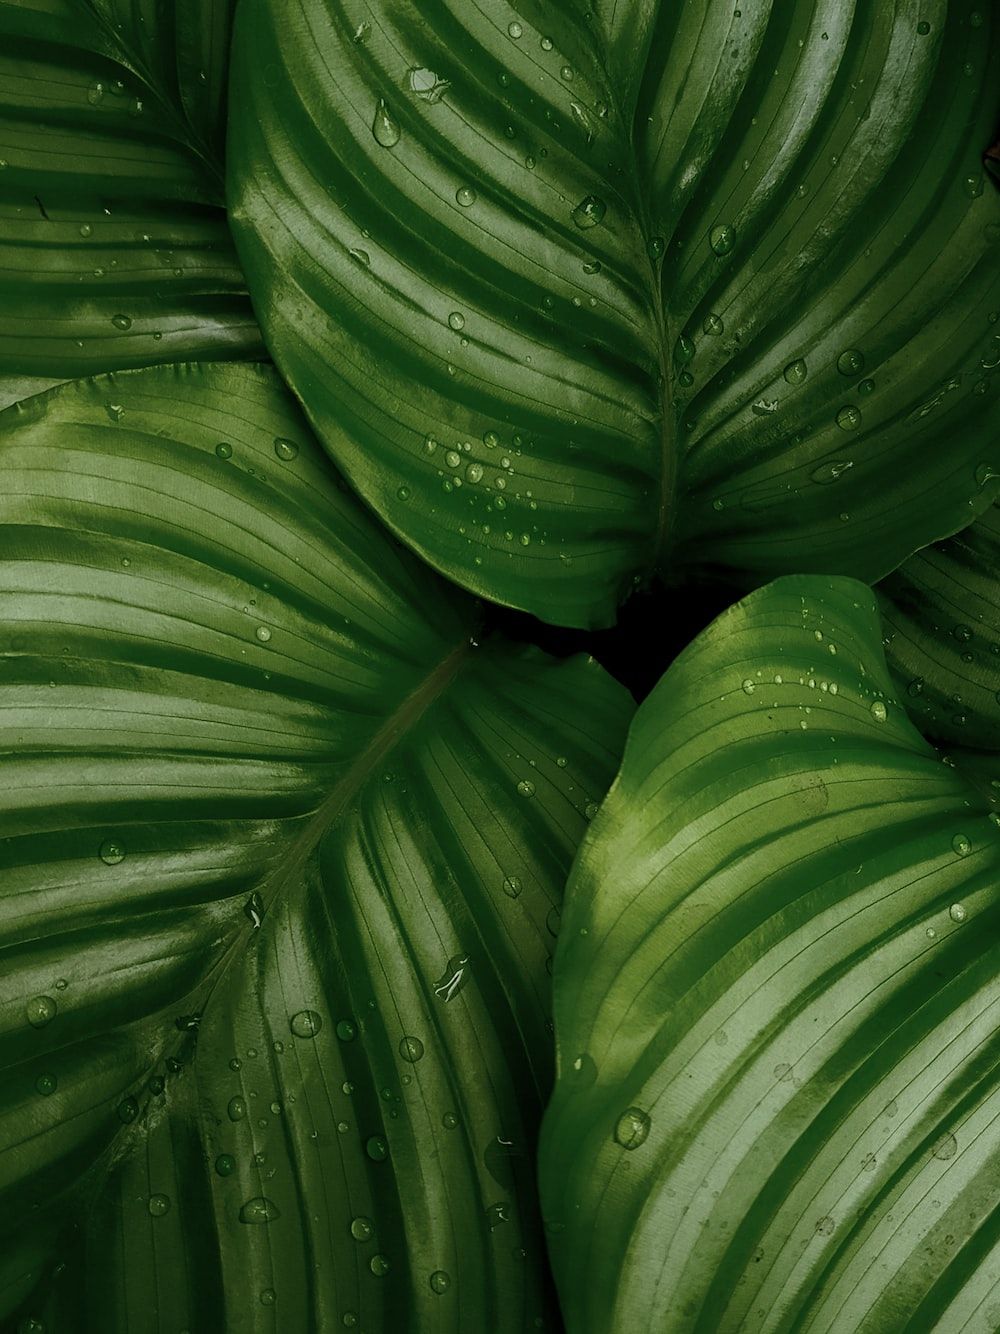 Green Leaves Picture. Download Free Image